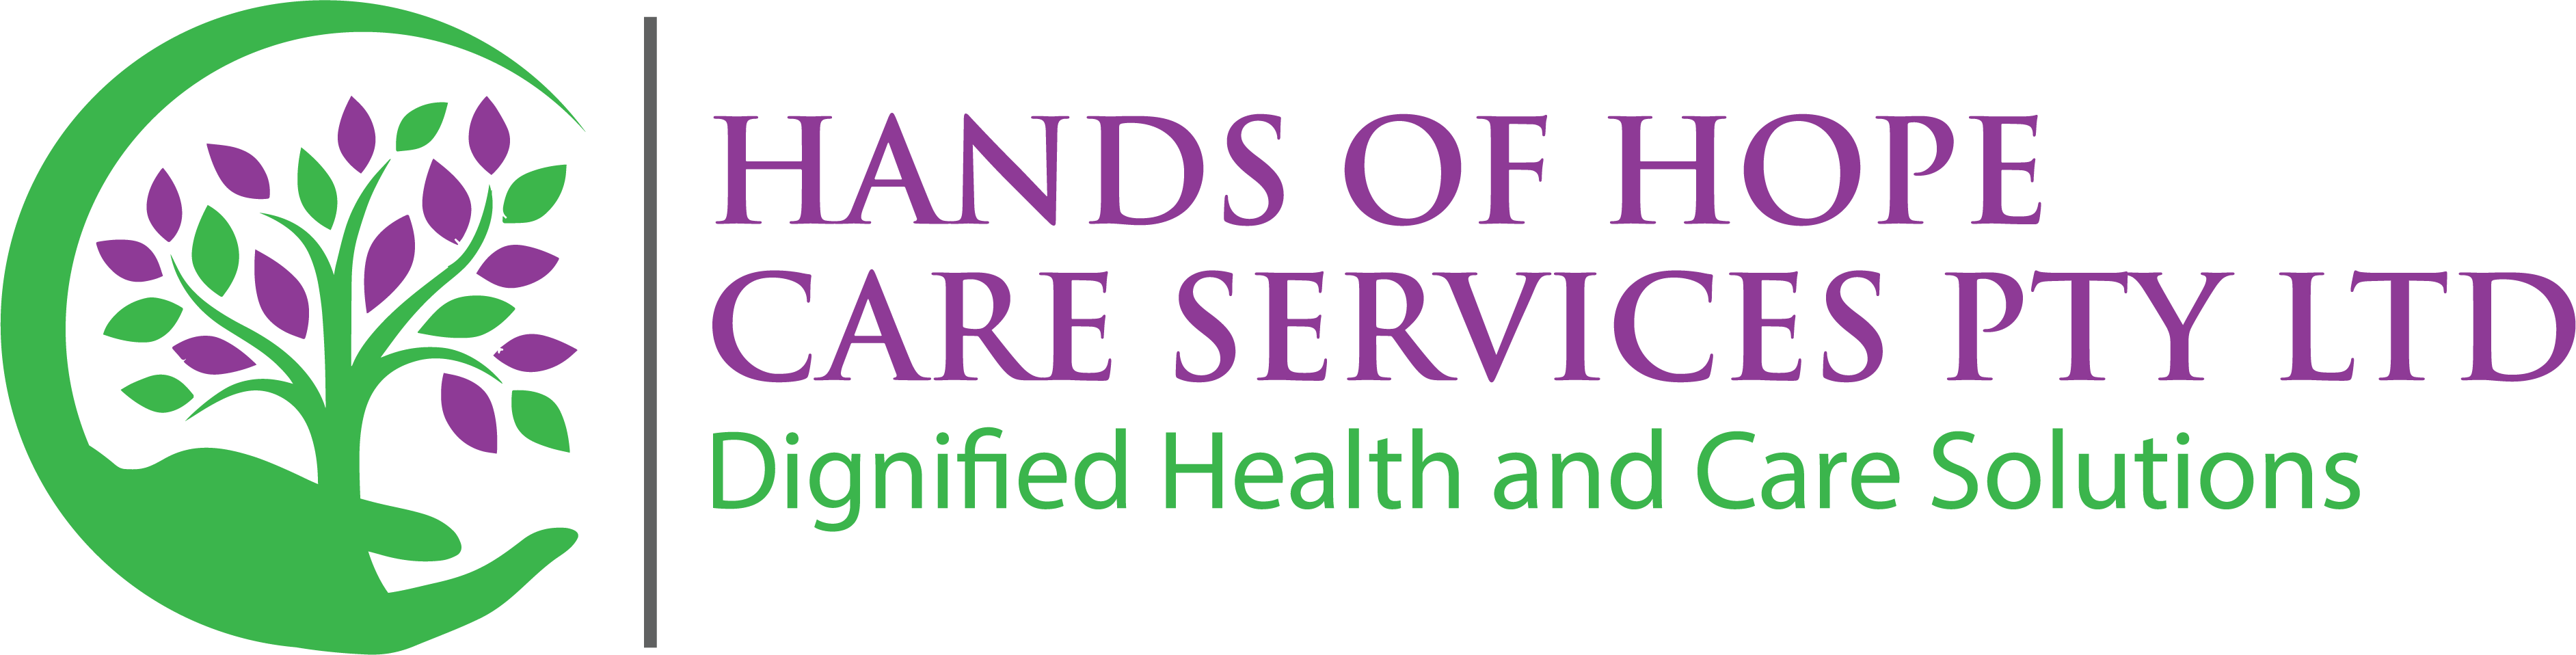 Home - Hands of Hope Healthcare Service